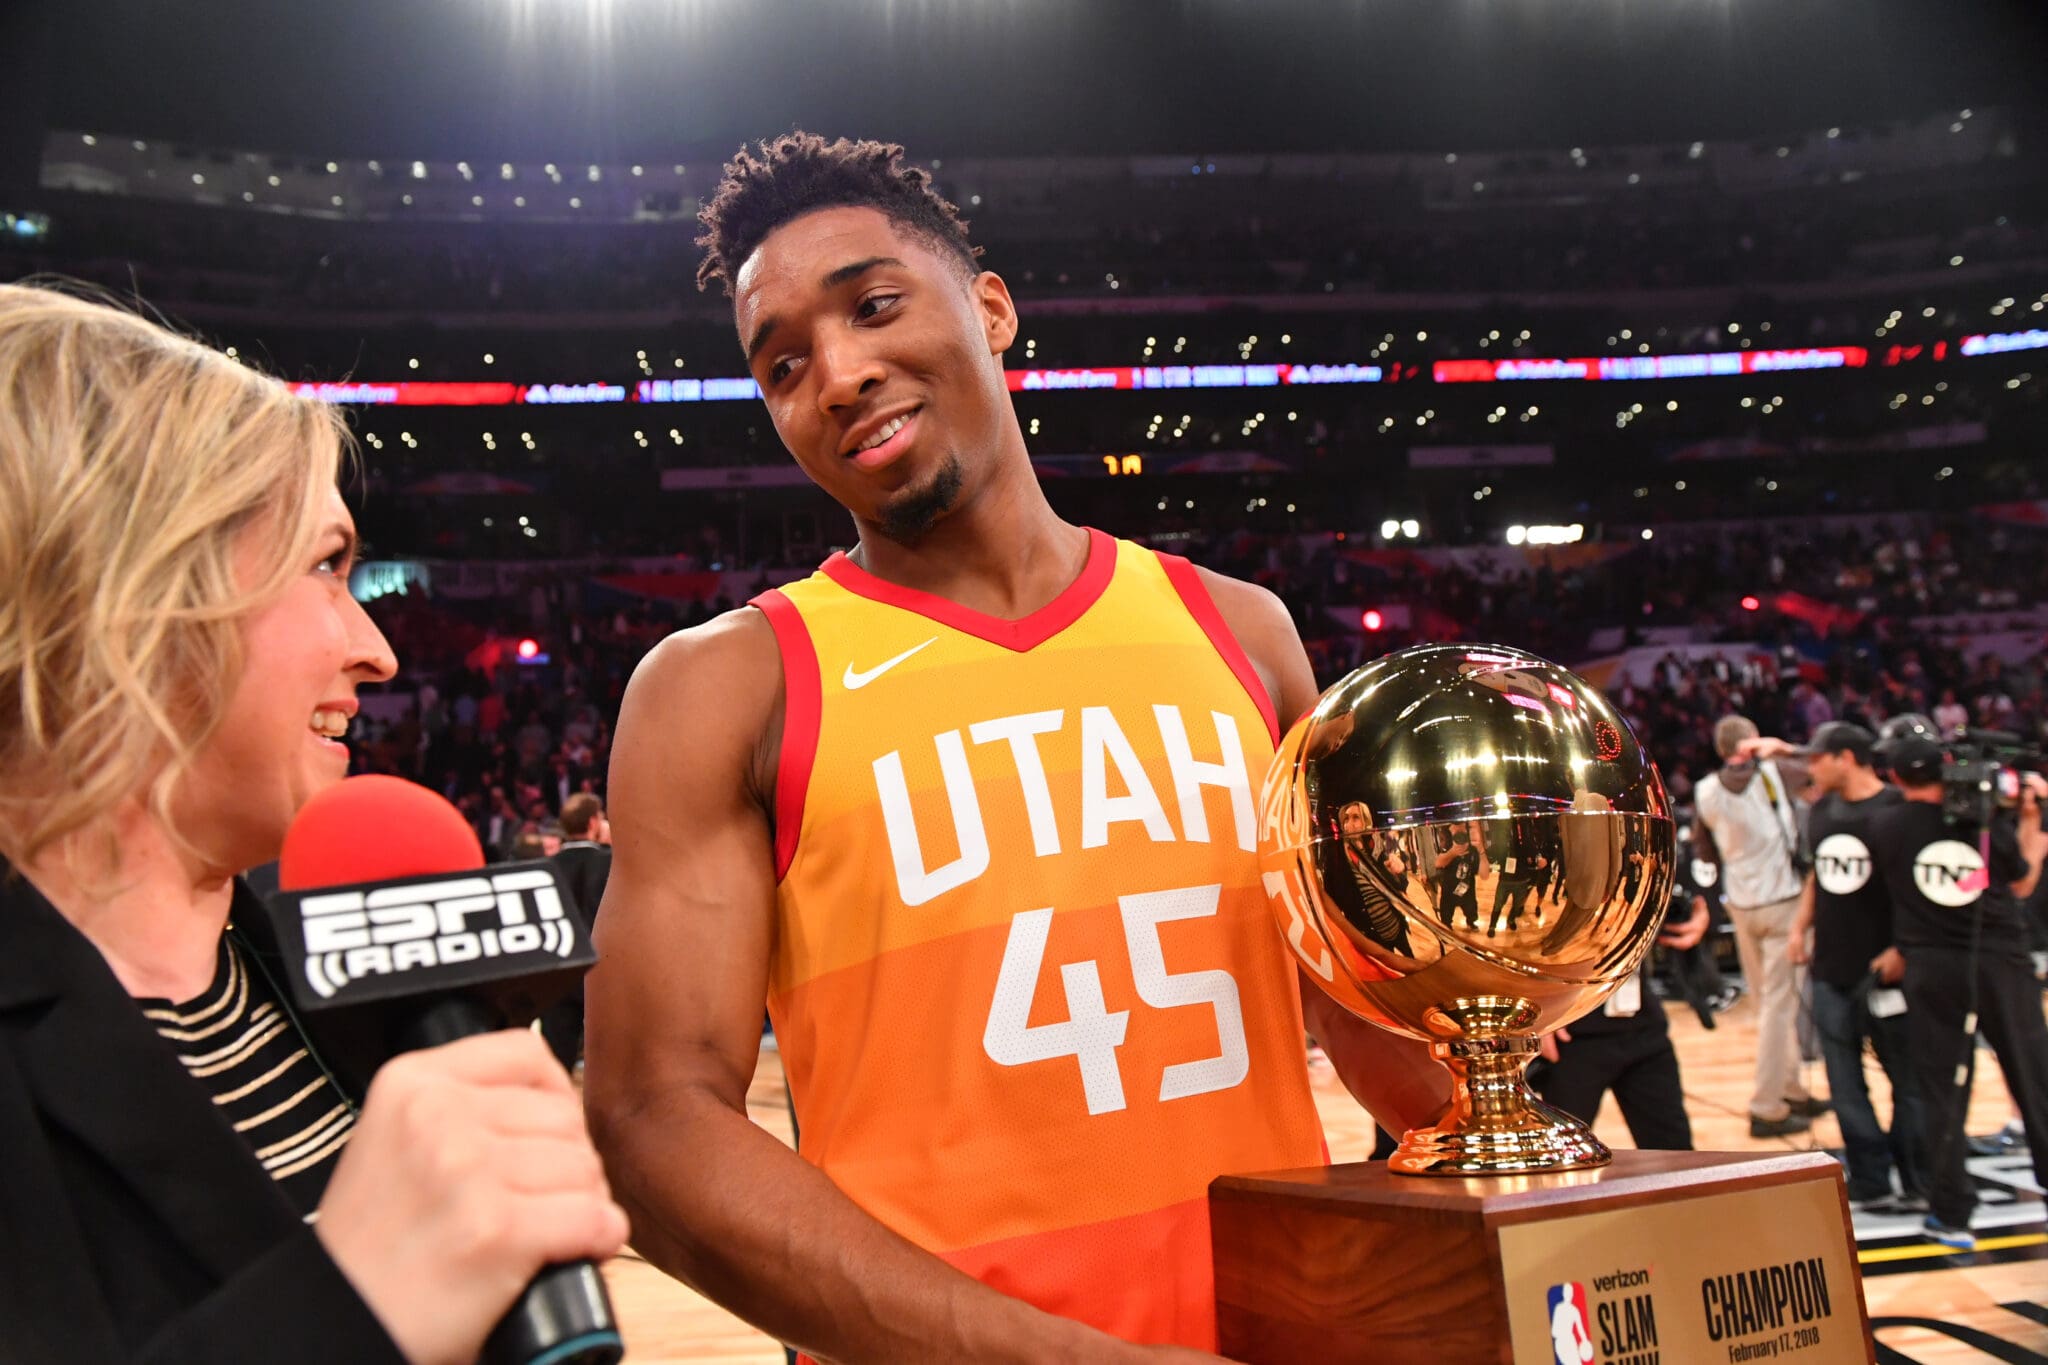 All-Star dunk contest: Utah's Donovan Mitchell wins with nod to